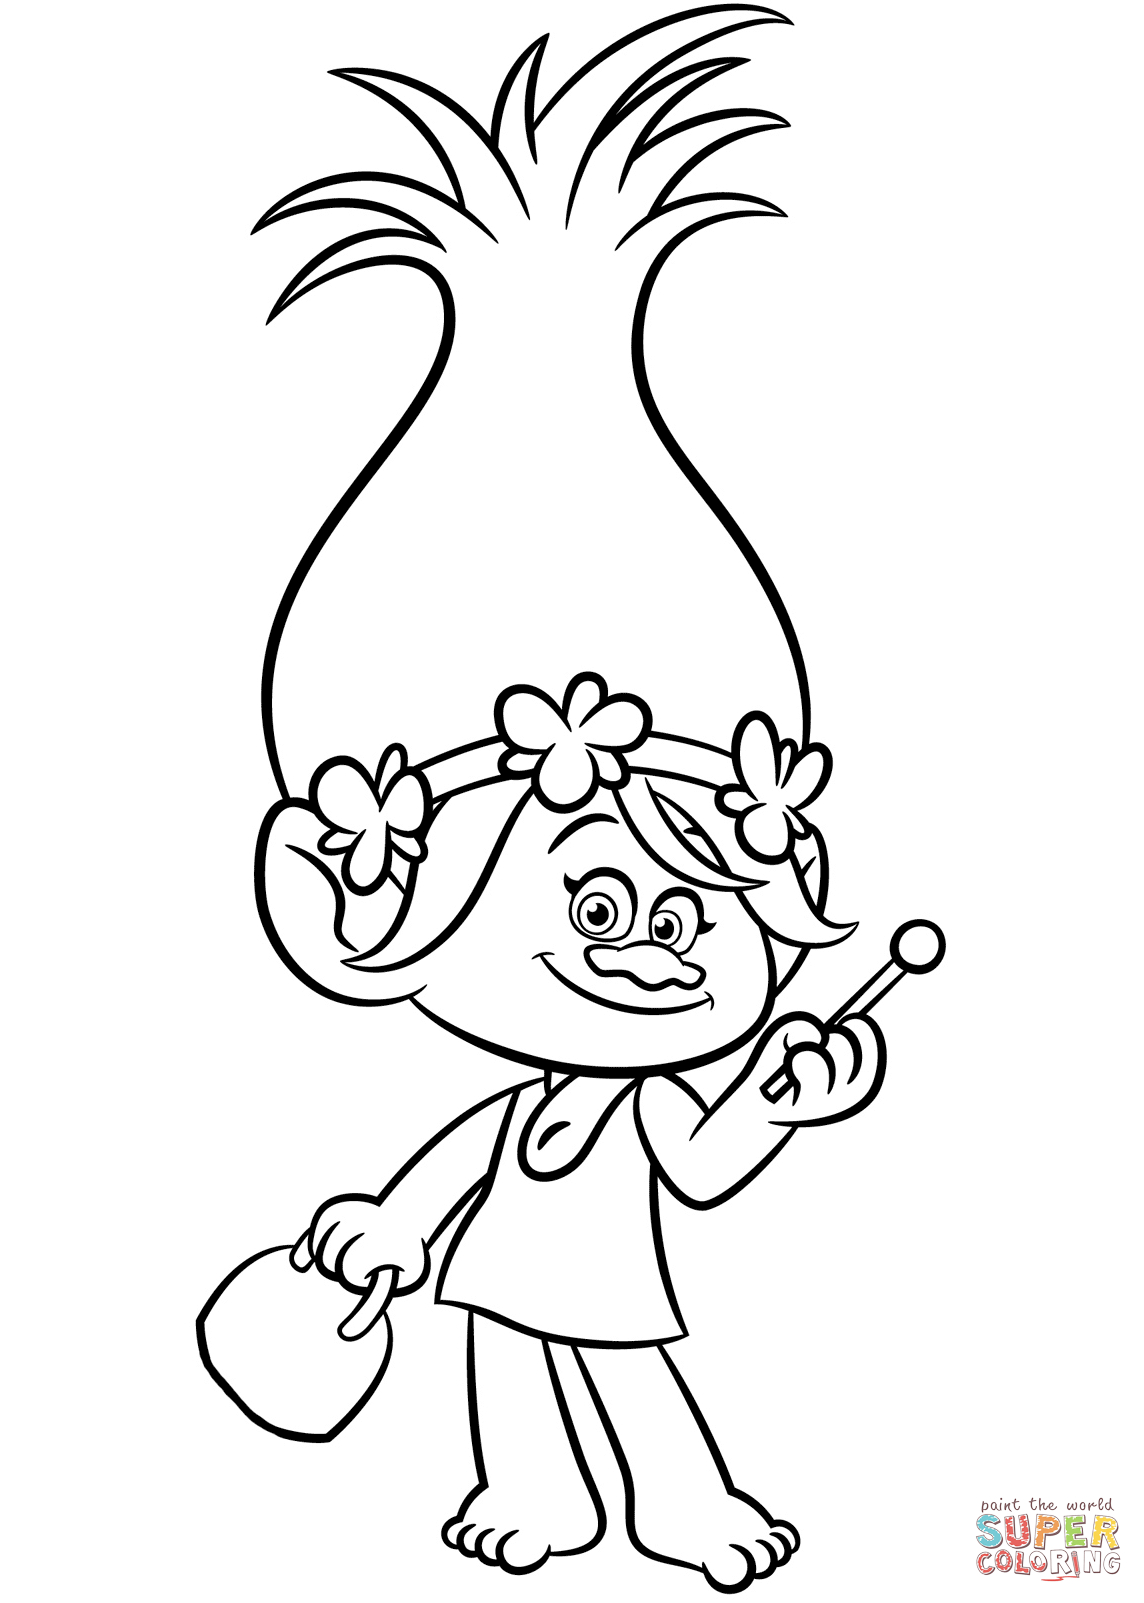 Poppy From Trolls Coloring Page From Dreamworks Trolls Category - Free Printable Troll Coloring Pages